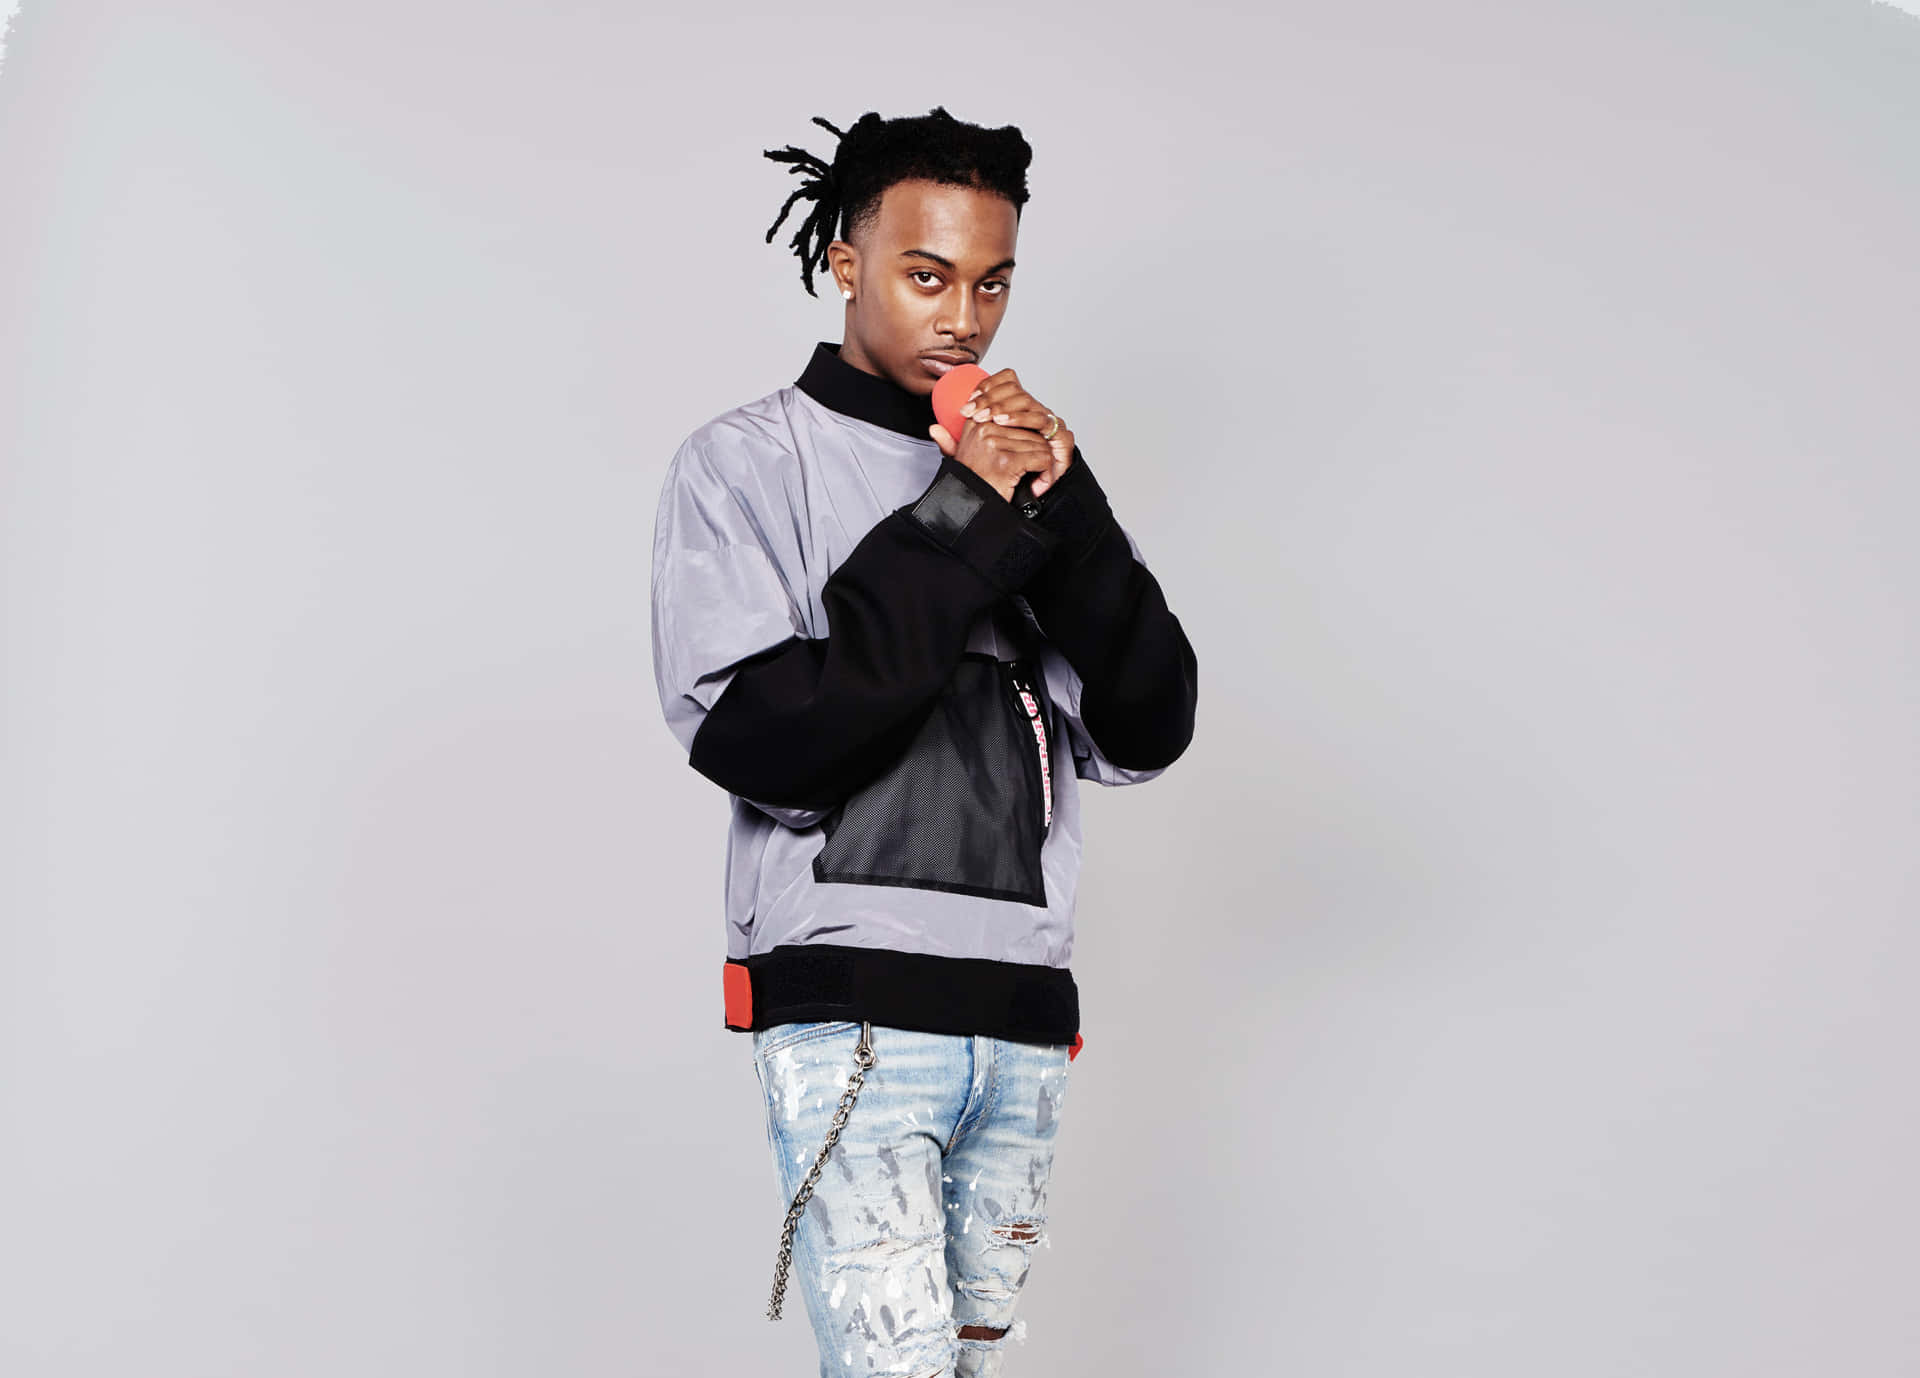 Playboi Carti making waves in the music industry Wallpaper